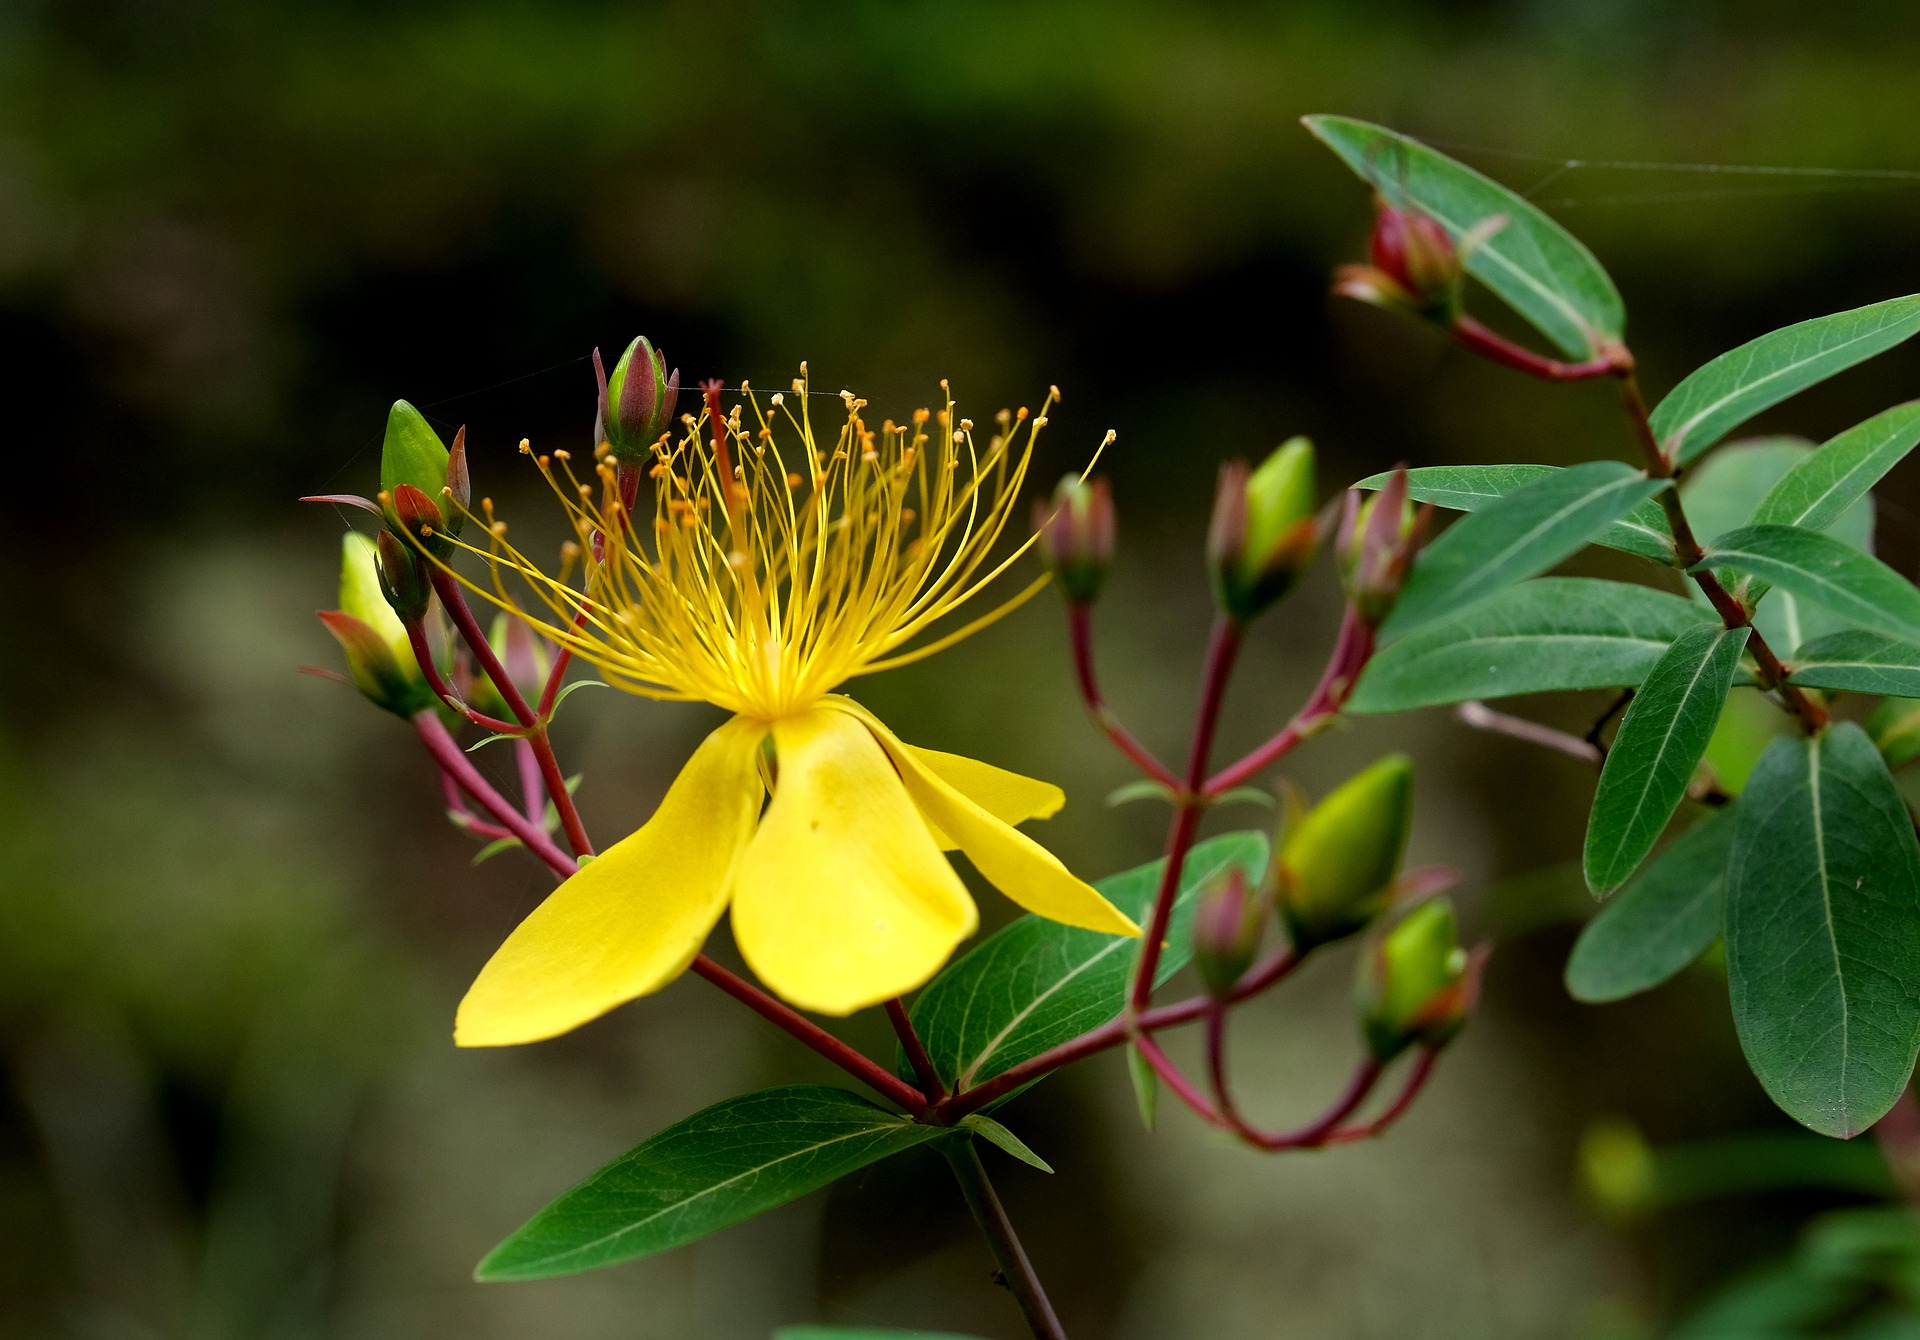 Research suggests St John's Wort can provide short-term relief from depression symptoms